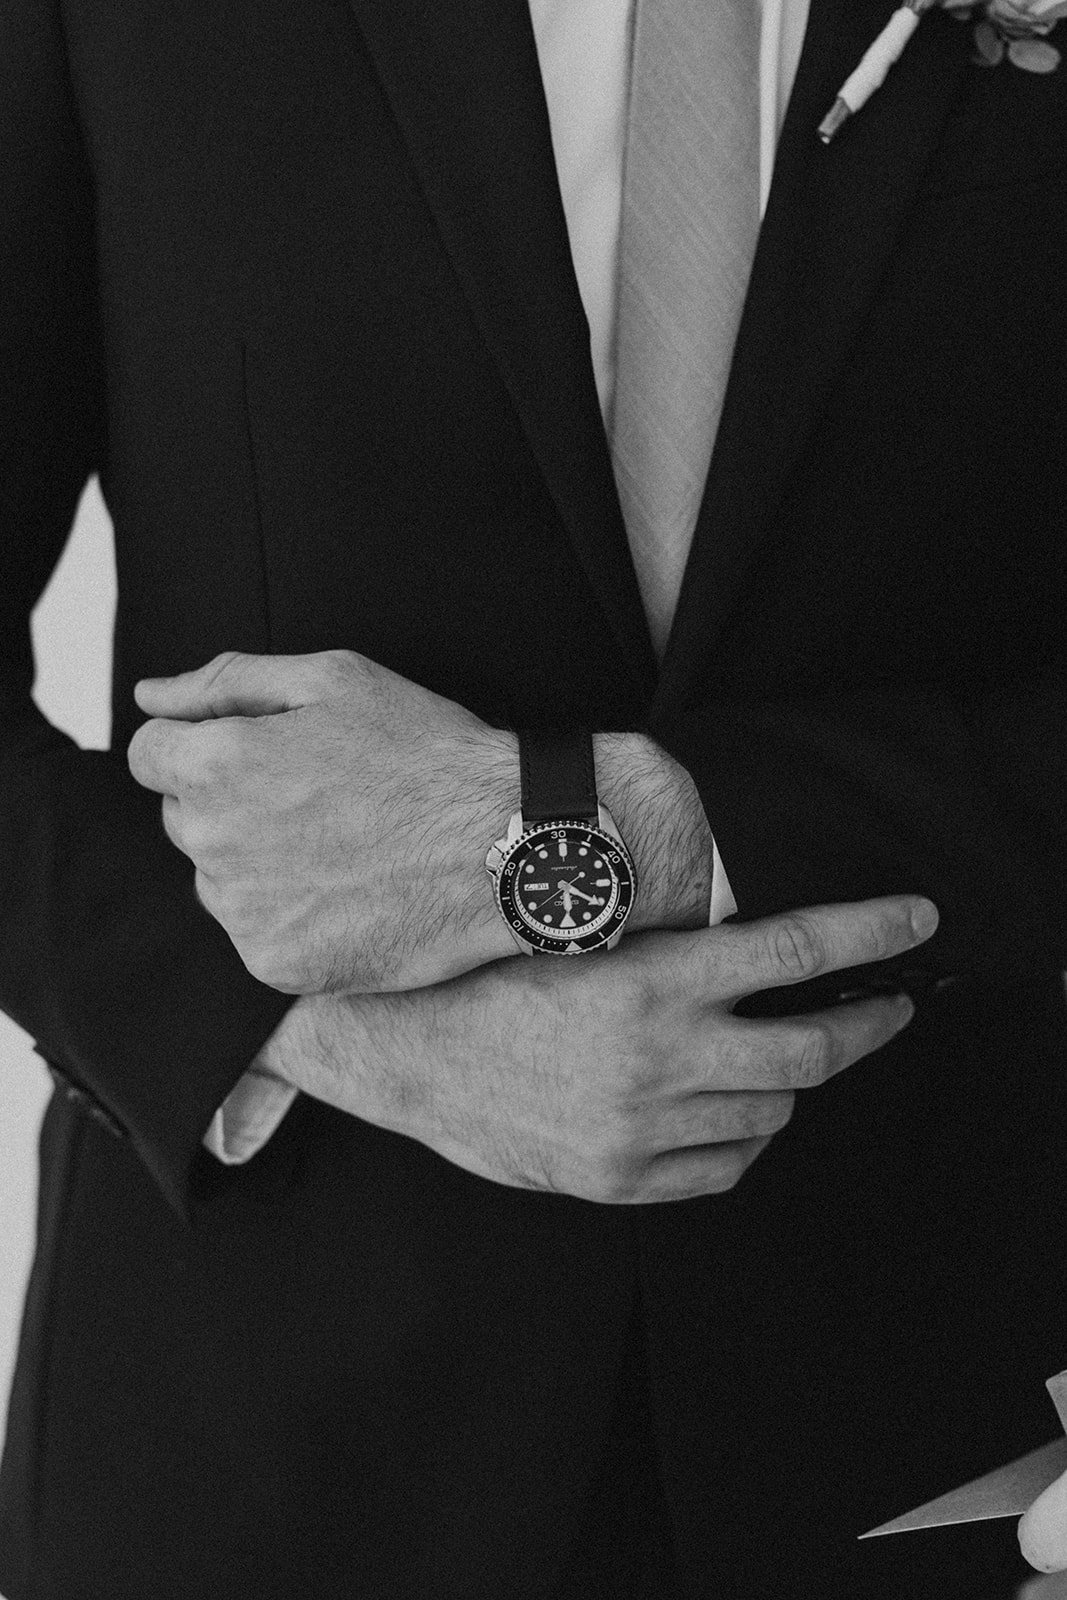 Groom showing off his new watch from his bride.